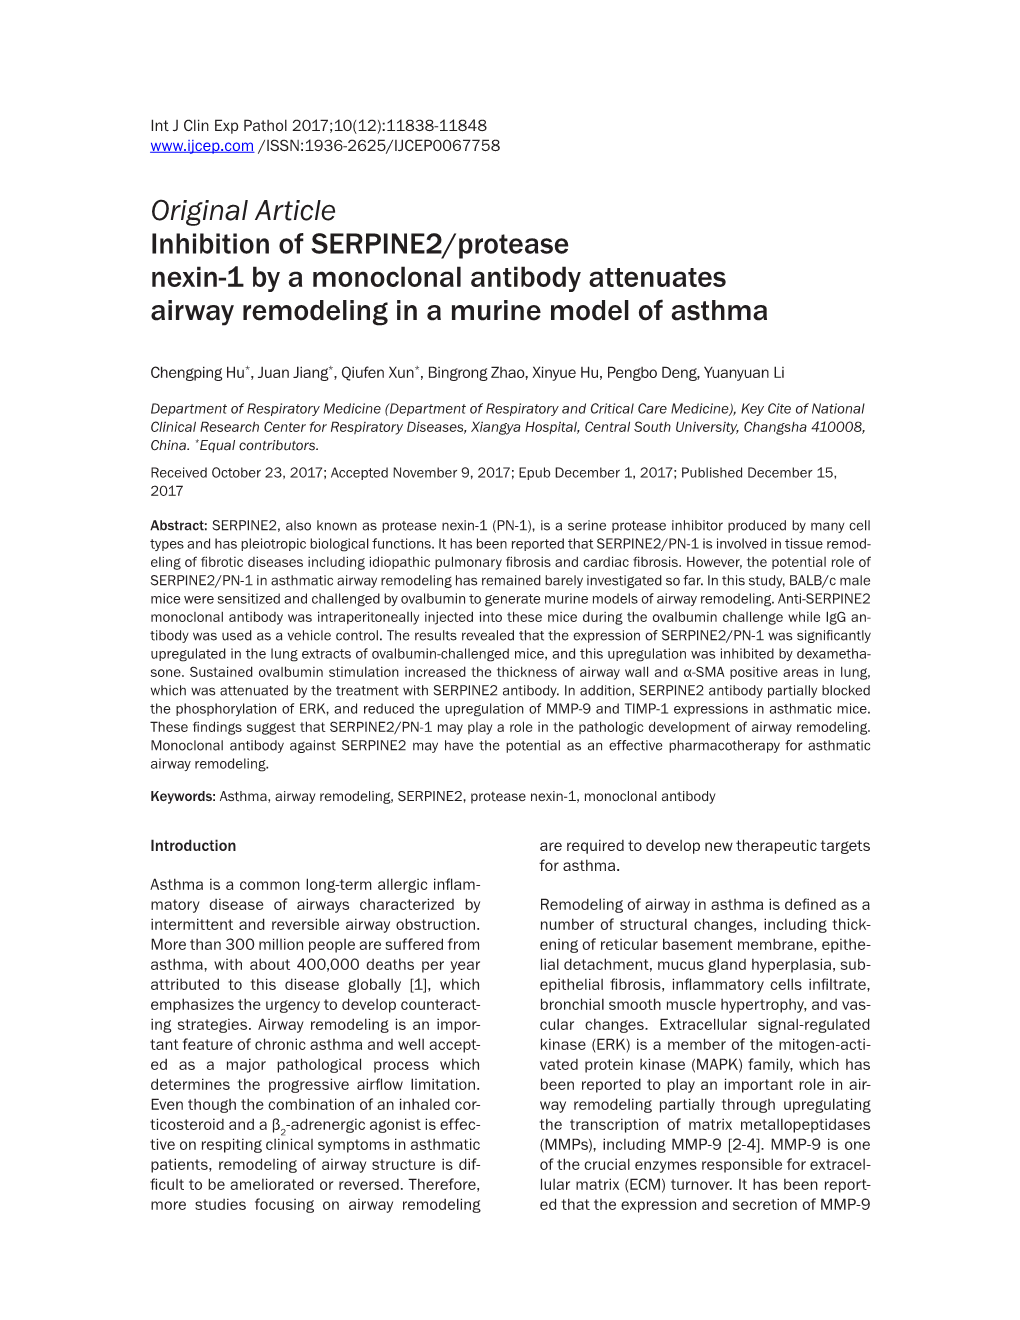 Original Article Inhibition of SERPINE2/Protease Nexin-1 by a Monoclonal Antibody Attenuates Airway Remodeling in a Murine Model of Asthma